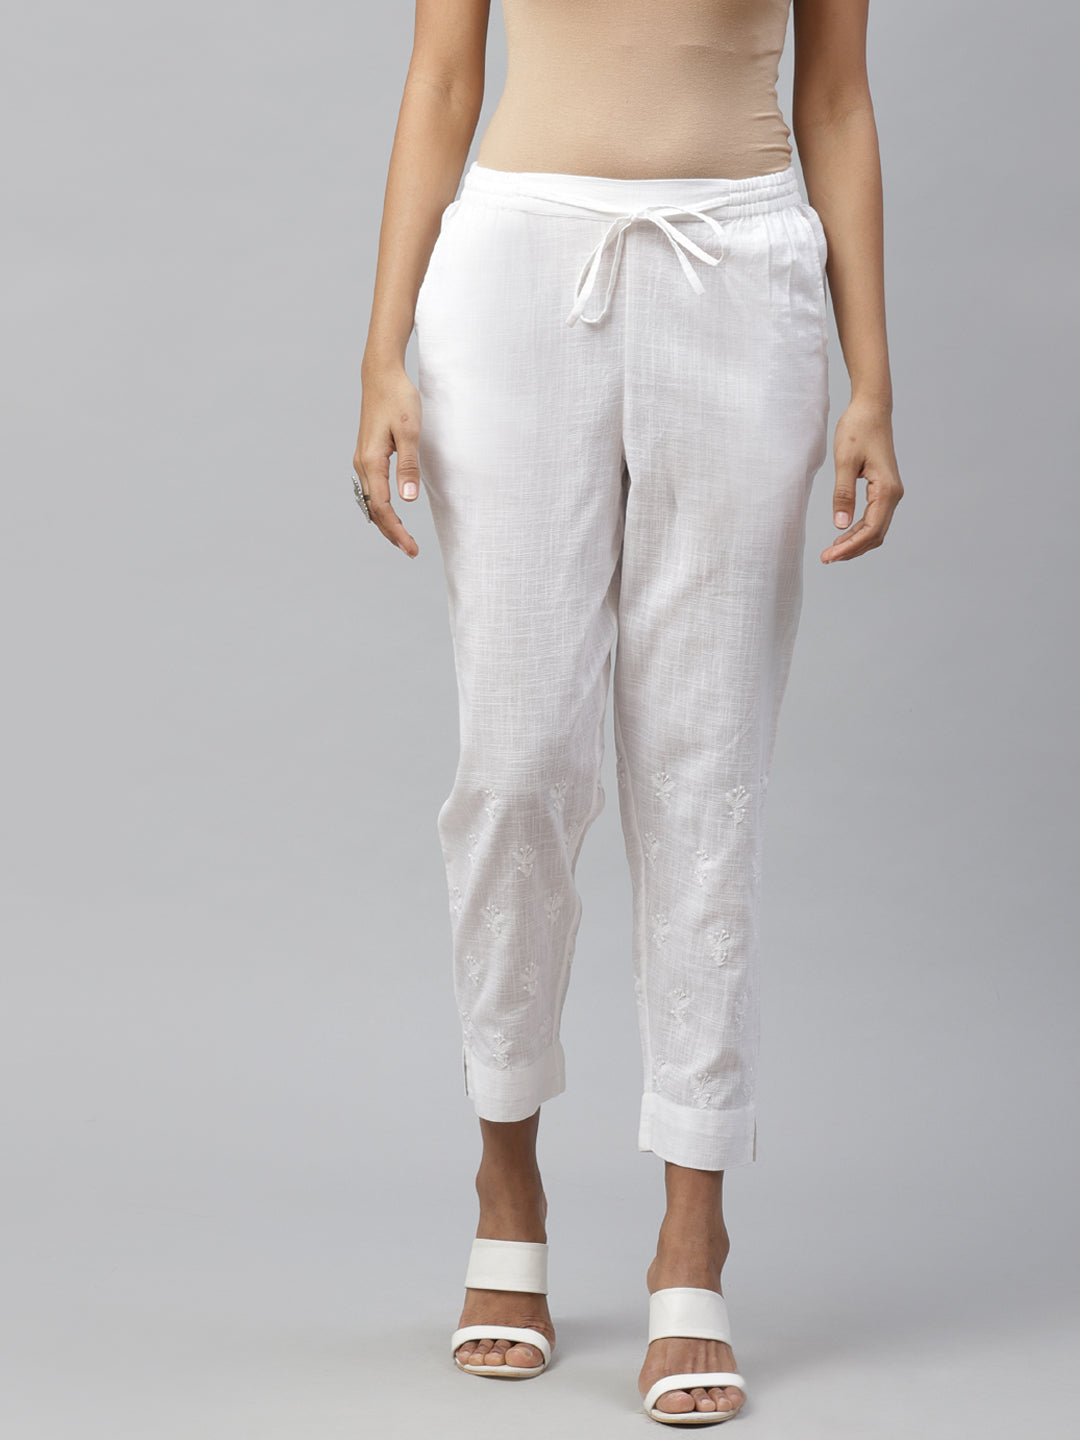 White Cotton Embroidered Slim Fit Pants